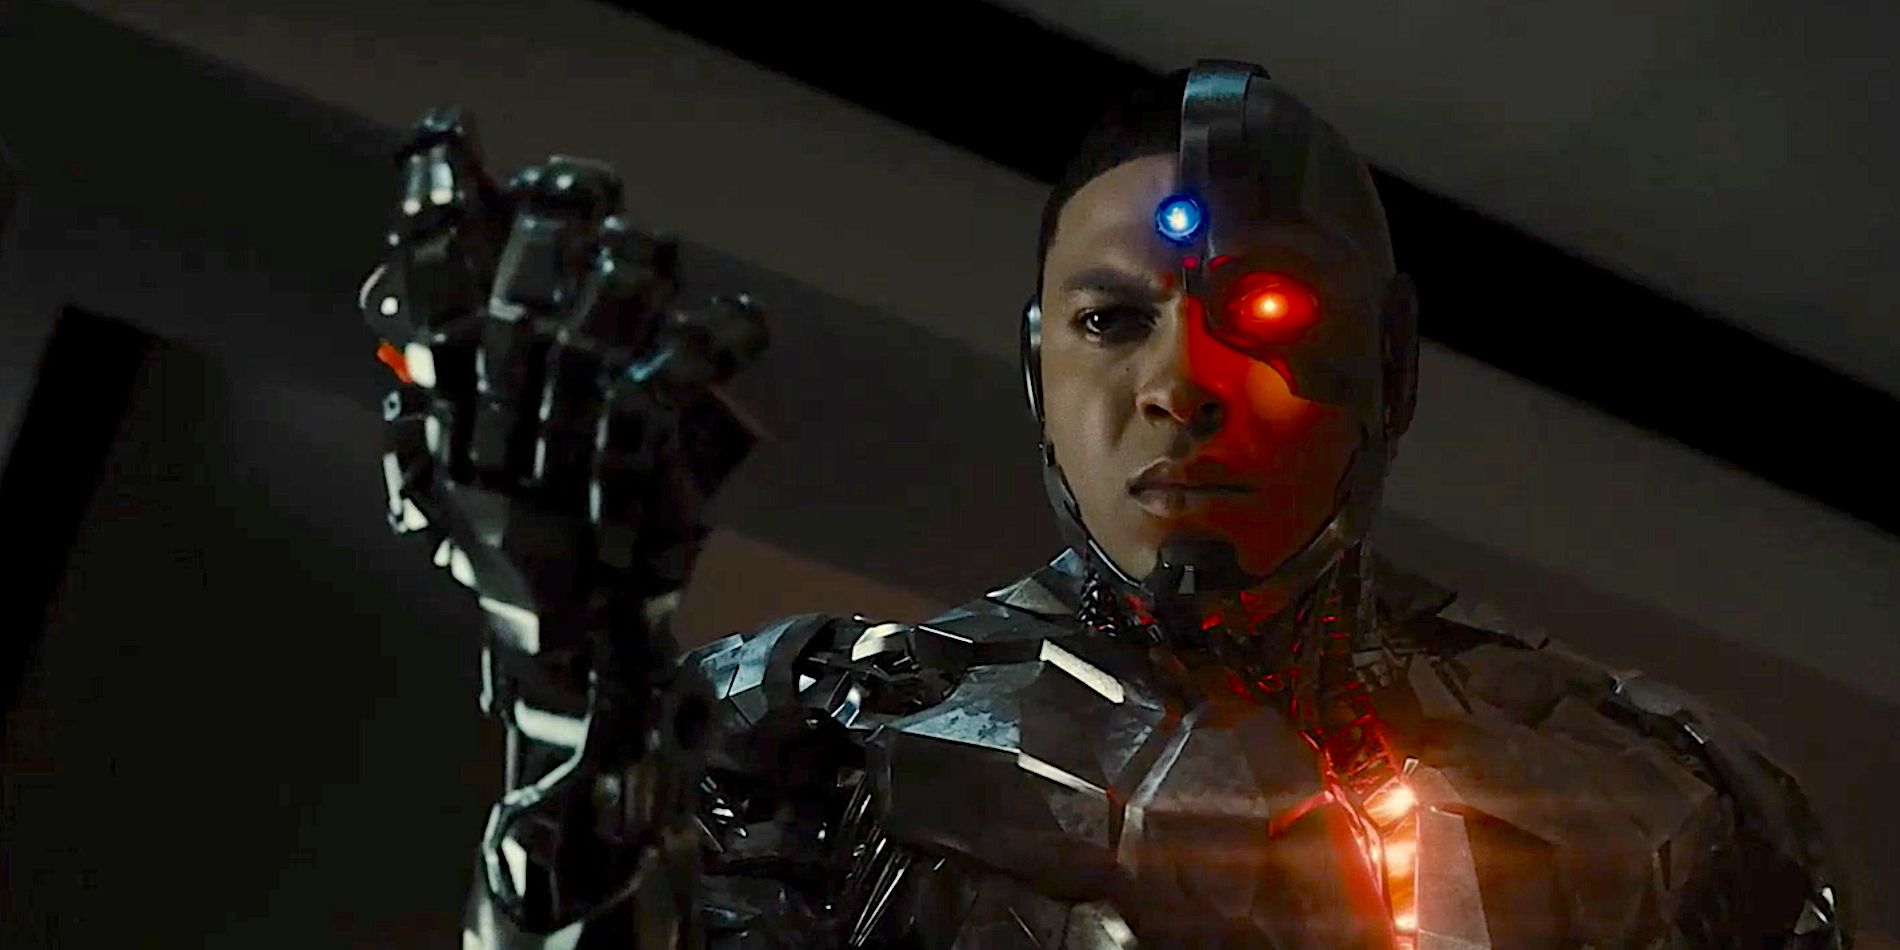 Cyborg holding up his first and crushing his father's tape recorder